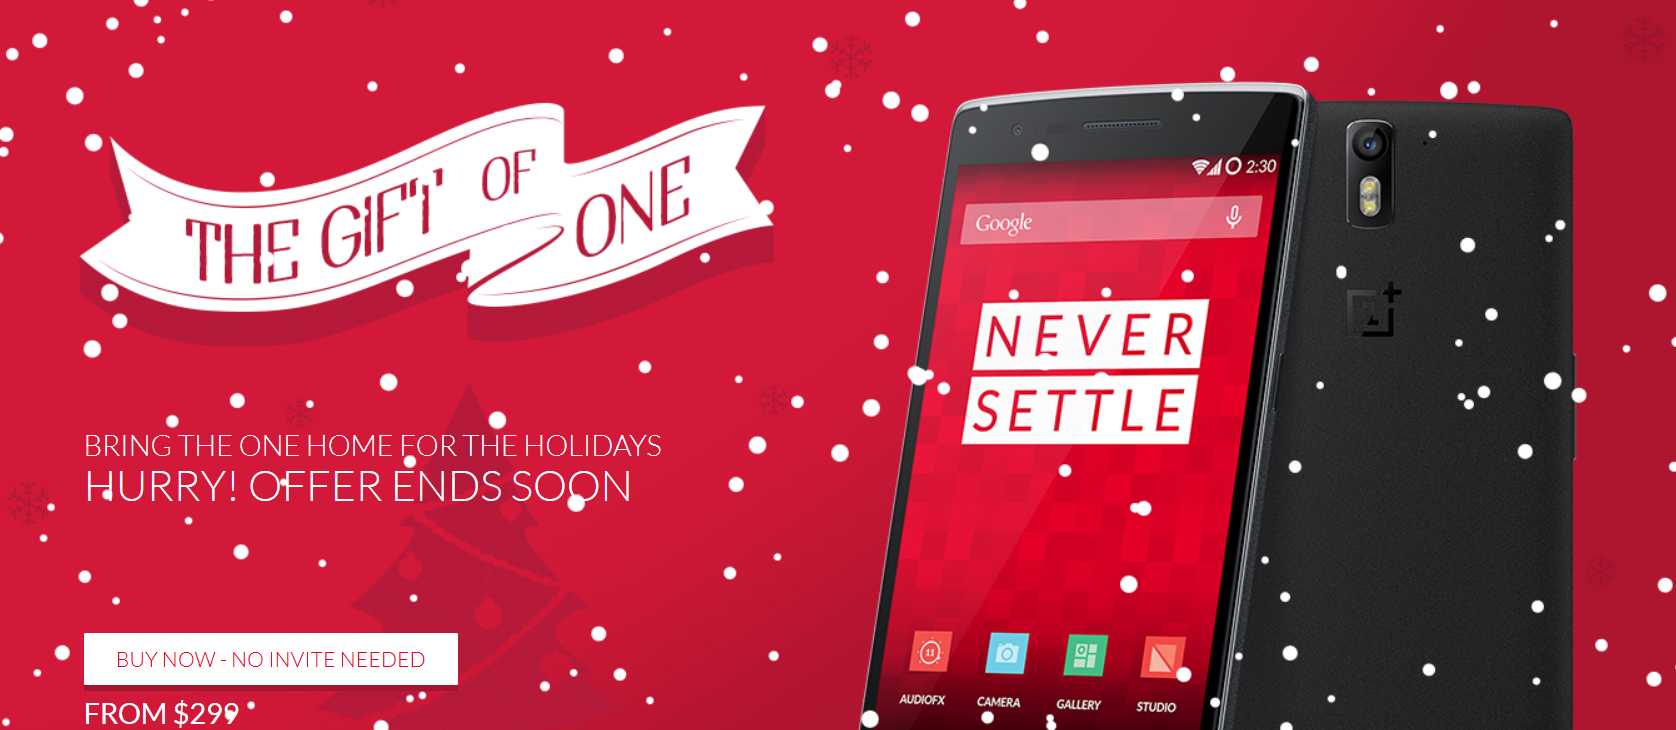 Oneplus Gives You Another Opportunity To Buy A Oneplus One Without An